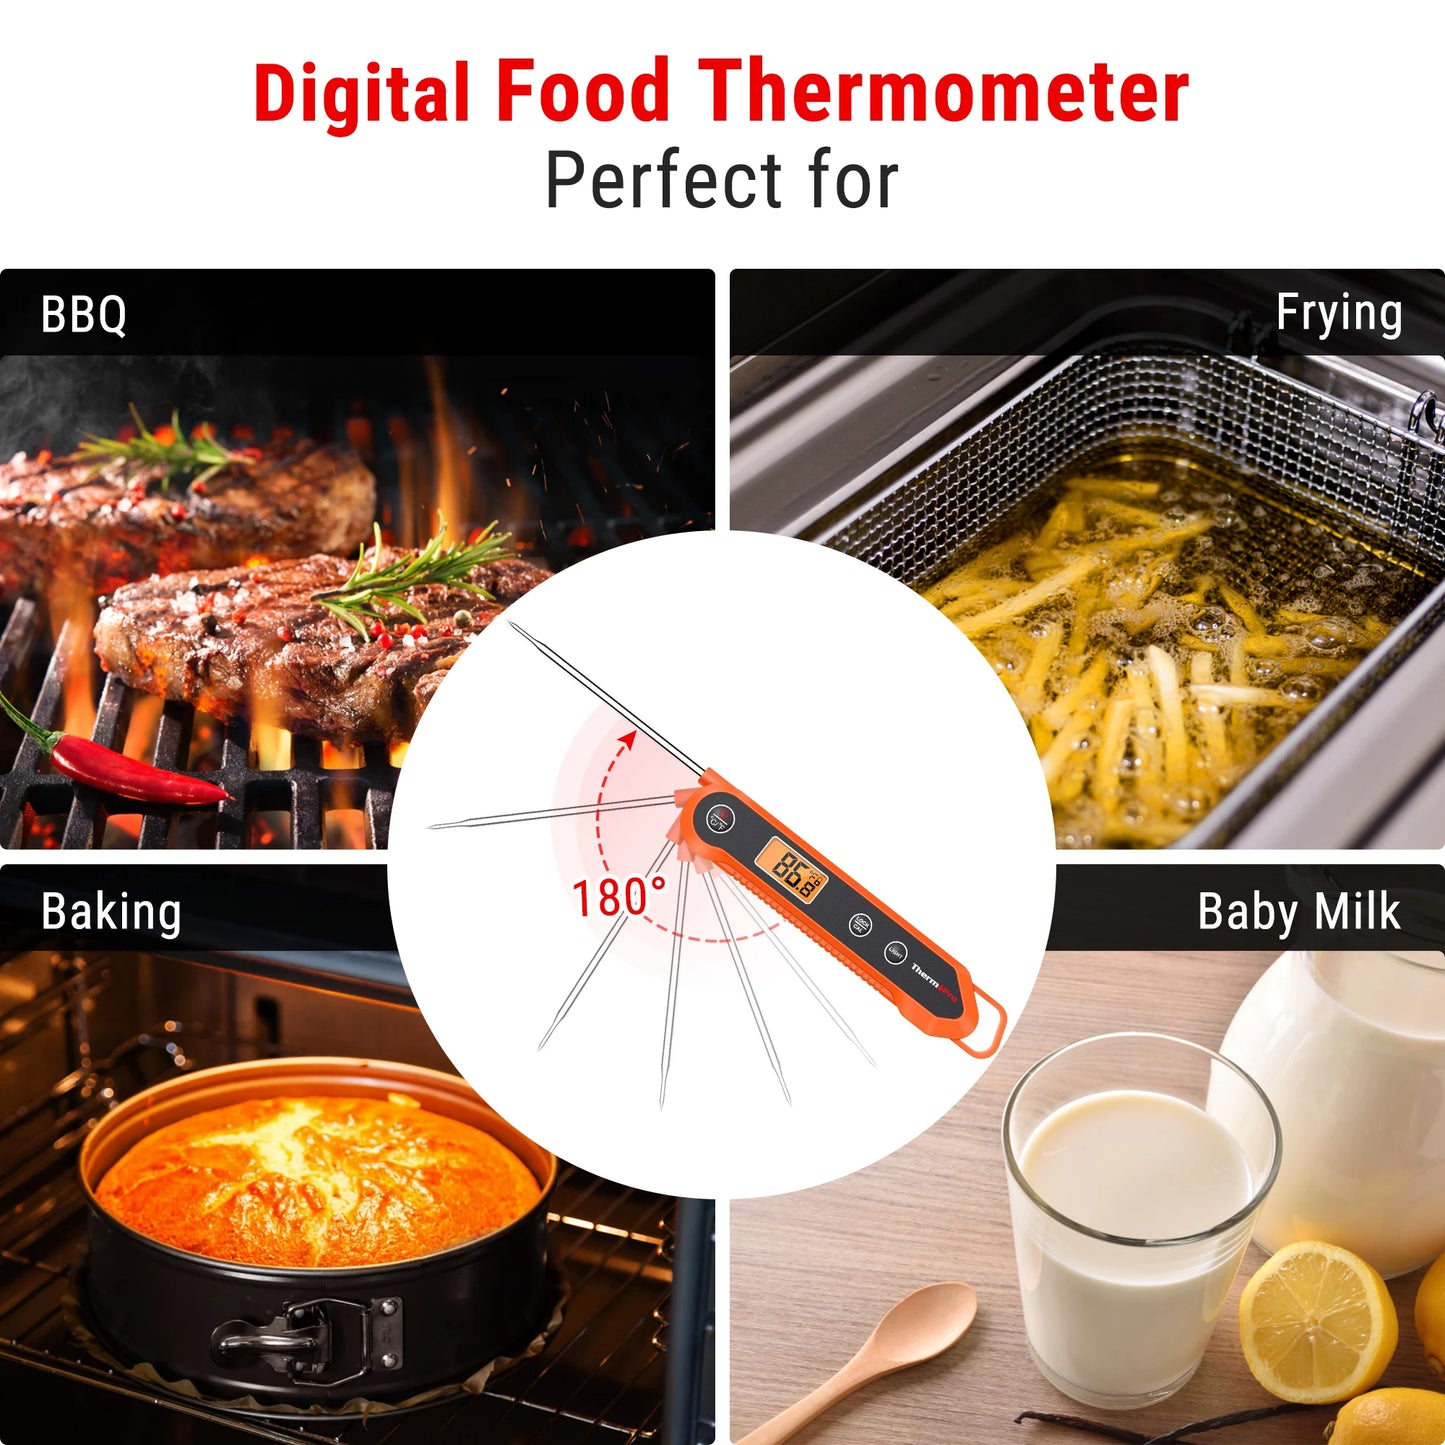 ThermoPro TP03H Waterproof Barbecue Cooking Instant Read Meat Thermometer